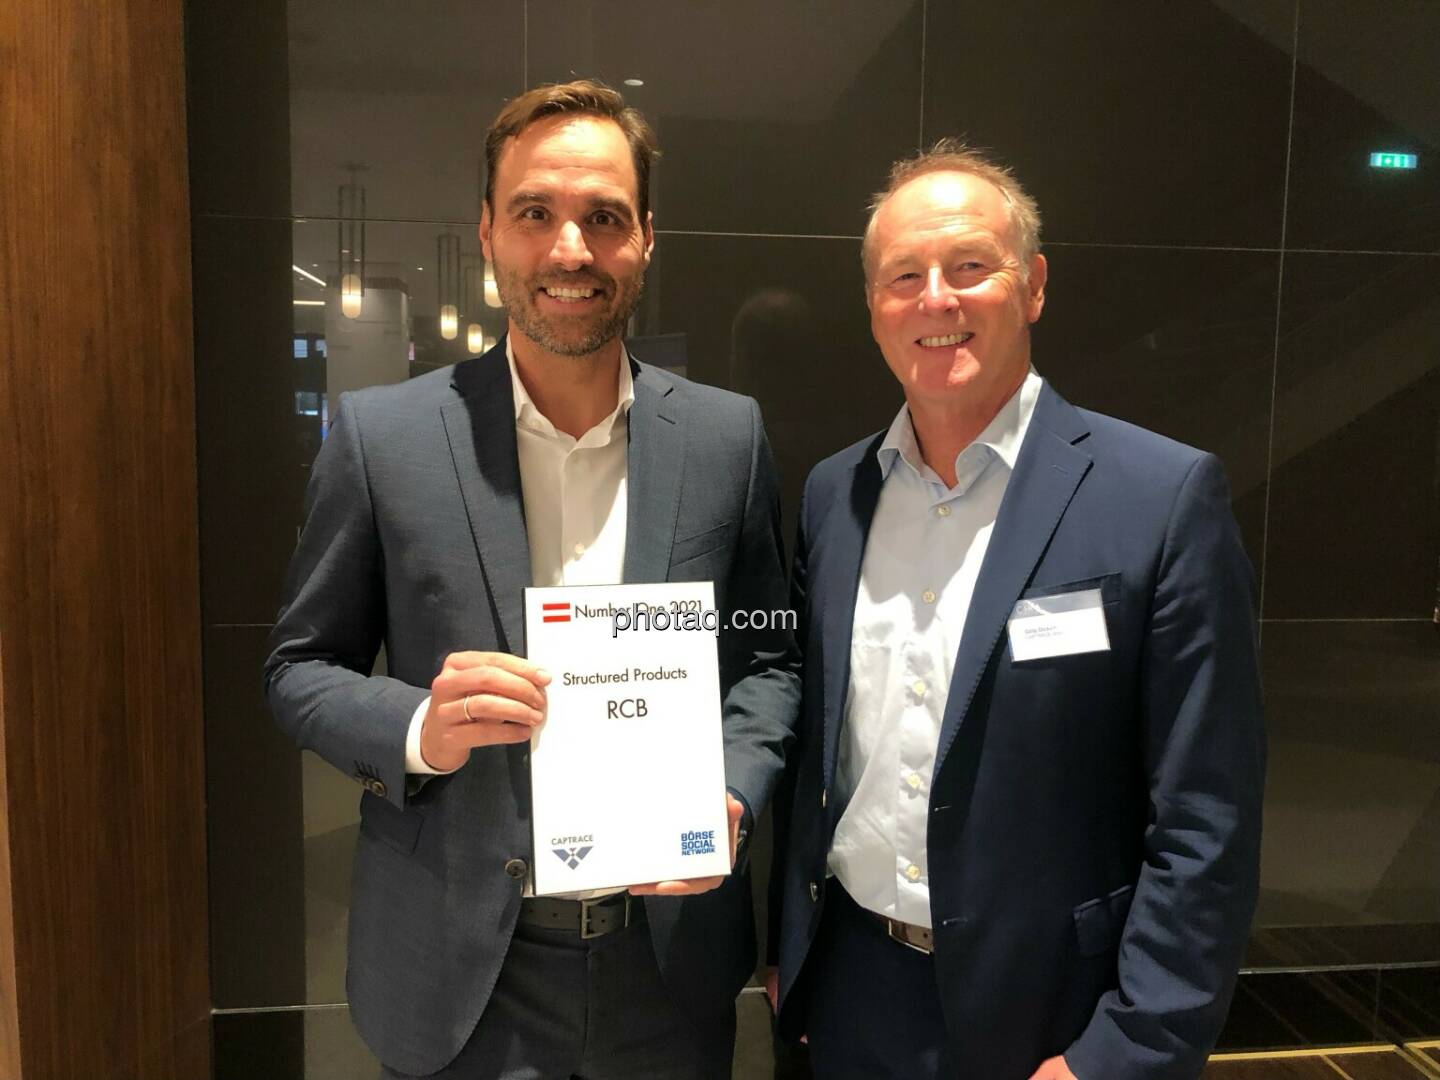 Number One Awards 2021 - Structured Products RCB, Philipp Arnold (RCB), Götz Dickert (Captrace)